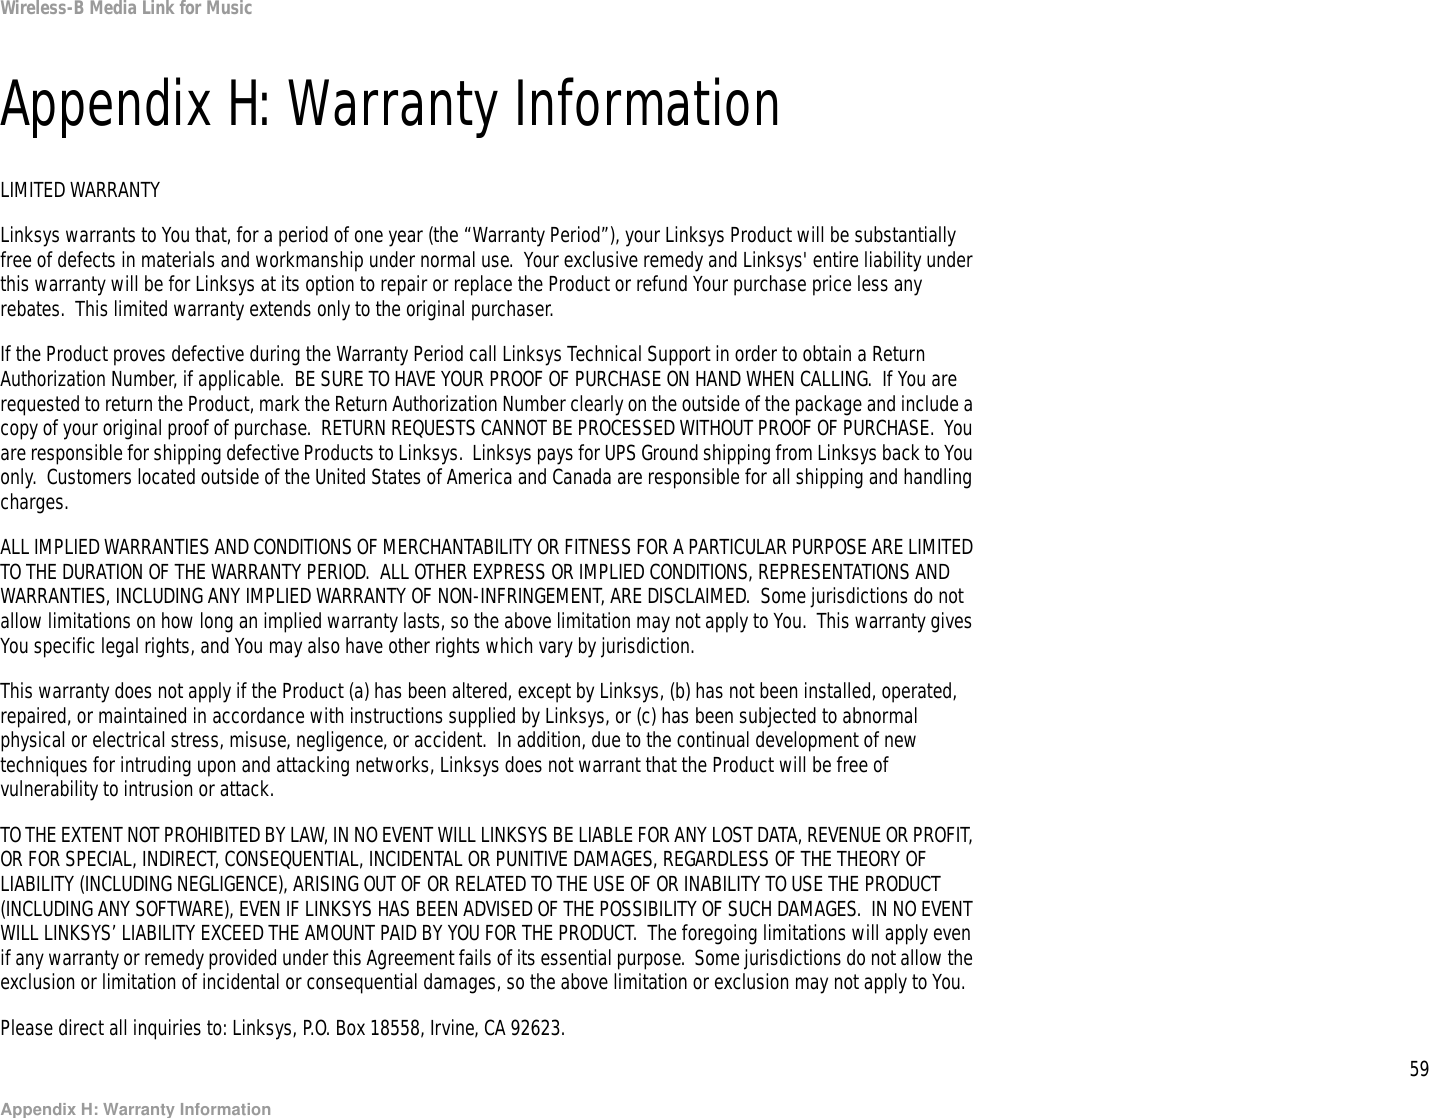 59Appendix H: Warranty InformationWireless-B Media Link for MusicAppendix H: Warranty InformationLIMITED WARRANTYLinksys warrants to You that, for a period of one year (the “Warranty Period”), your Linksys Product will be substantially free of defects in materials and workmanship under normal use.  Your exclusive remedy and Linksys&apos; entire liability under this warranty will be for Linksys at its option to repair or replace the Product or refund Your purchase price less any rebates.  This limited warranty extends only to the original purchaser.  If the Product proves defective during the Warranty Period call Linksys Technical Support in order to obtain a Return Authorization Number, if applicable.  BE SURE TO HAVE YOUR PROOF OF PURCHASE ON HAND WHEN CALLING.  If You are requested to return the Product, mark the Return Authorization Number clearly on the outside of the package and include a copy of your original proof of purchase.  RETURN REQUESTS CANNOT BE PROCESSED WITHOUT PROOF OF PURCHASE.  You are responsible for shipping defective Products to Linksys.  Linksys pays for UPS Ground shipping from Linksys back to You only.  Customers located outside of the United States of America and Canada are responsible for all shipping and handling charges. ALL IMPLIED WARRANTIES AND CONDITIONS OF MERCHANTABILITY OR FITNESS FOR A PARTICULAR PURPOSE ARE LIMITED TO THE DURATION OF THE WARRANTY PERIOD.  ALL OTHER EXPRESS OR IMPLIED CONDITIONS, REPRESENTATIONS AND WARRANTIES, INCLUDING ANY IMPLIED WARRANTY OF NON-INFRINGEMENT, ARE DISCLAIMED.  Some jurisdictions do not allow limitations on how long an implied warranty lasts, so the above limitation may not apply to You.  This warranty gives You specific legal rights, and You may also have other rights which vary by jurisdiction.This warranty does not apply if the Product (a) has been altered, except by Linksys, (b) has not been installed, operated, repaired, or maintained in accordance with instructions supplied by Linksys, or (c) has been subjected to abnormal physical or electrical stress, misuse, negligence, or accident.  In addition, due to the continual development of new techniques for intruding upon and attacking networks, Linksys does not warrant that the Product will be free of vulnerability to intrusion or attack.TO THE EXTENT NOT PROHIBITED BY LAW, IN NO EVENT WILL LINKSYS BE LIABLE FOR ANY LOST DATA, REVENUE OR PROFIT, OR FOR SPECIAL, INDIRECT, CONSEQUENTIAL, INCIDENTAL OR PUNITIVE DAMAGES, REGARDLESS OF THE THEORY OF LIABILITY (INCLUDING NEGLIGENCE), ARISING OUT OF OR RELATED TO THE USE OF OR INABILITY TO USE THE PRODUCT (INCLUDING ANY SOFTWARE), EVEN IF LINKSYS HAS BEEN ADVISED OF THE POSSIBILITY OF SUCH DAMAGES.  IN NO EVENT WILL LINKSYS’ LIABILITY EXCEED THE AMOUNT PAID BY YOU FOR THE PRODUCT.  The foregoing limitations will apply even if any warranty or remedy provided under this Agreement fails of its essential purpose.  Some jurisdictions do not allow the exclusion or limitation of incidental or consequential damages, so the above limitation or exclusion may not apply to You.Please direct all inquiries to: Linksys, P.O. Box 18558, Irvine, CA 92623.